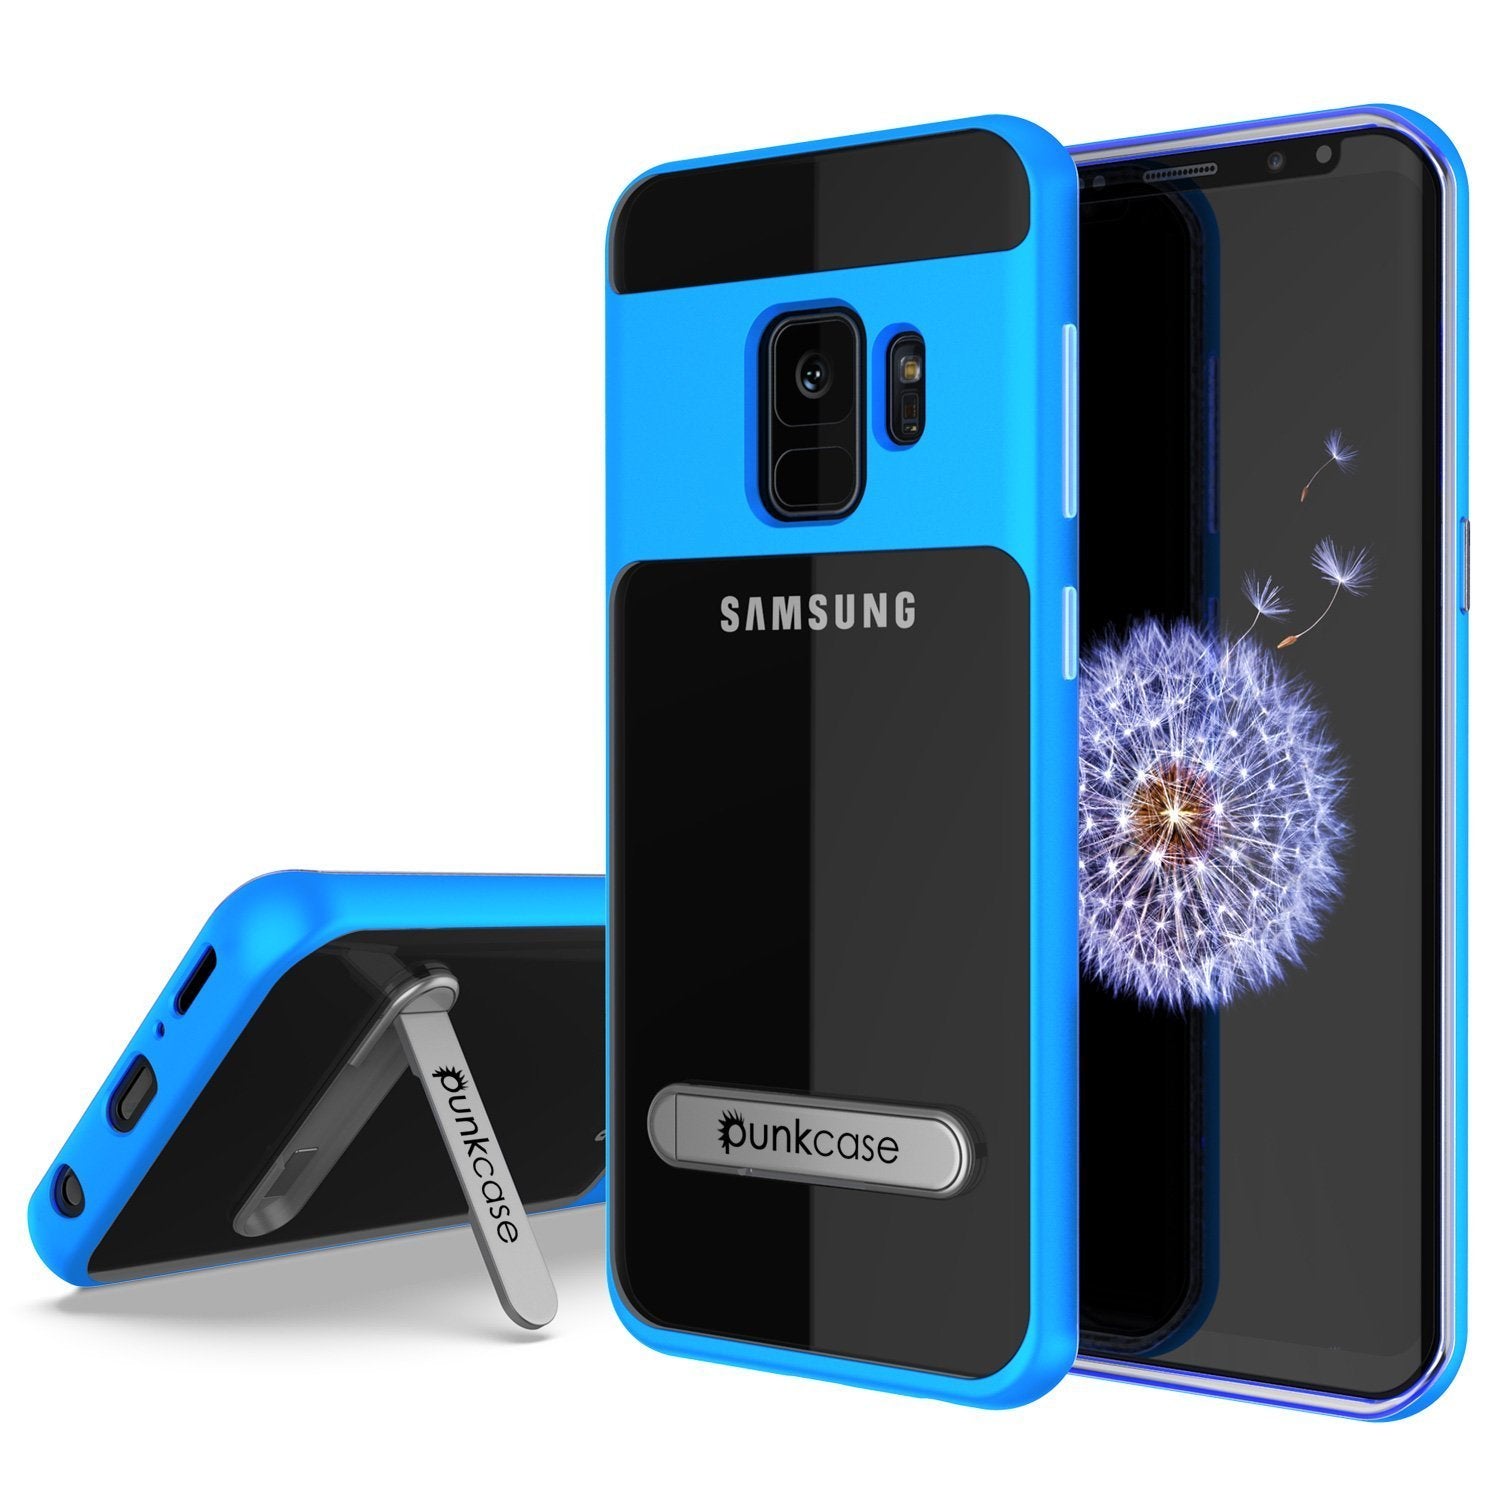 Galaxy S9 Case, PUNKcase [LUCID 3.0 Series] [Slim Fit] [Clear Back] Armor Cover w/ Integrated Kickstand, Anti-Shock System & PUNKSHIELD Screen Protector for Samsung Galaxy S9 [Blue]